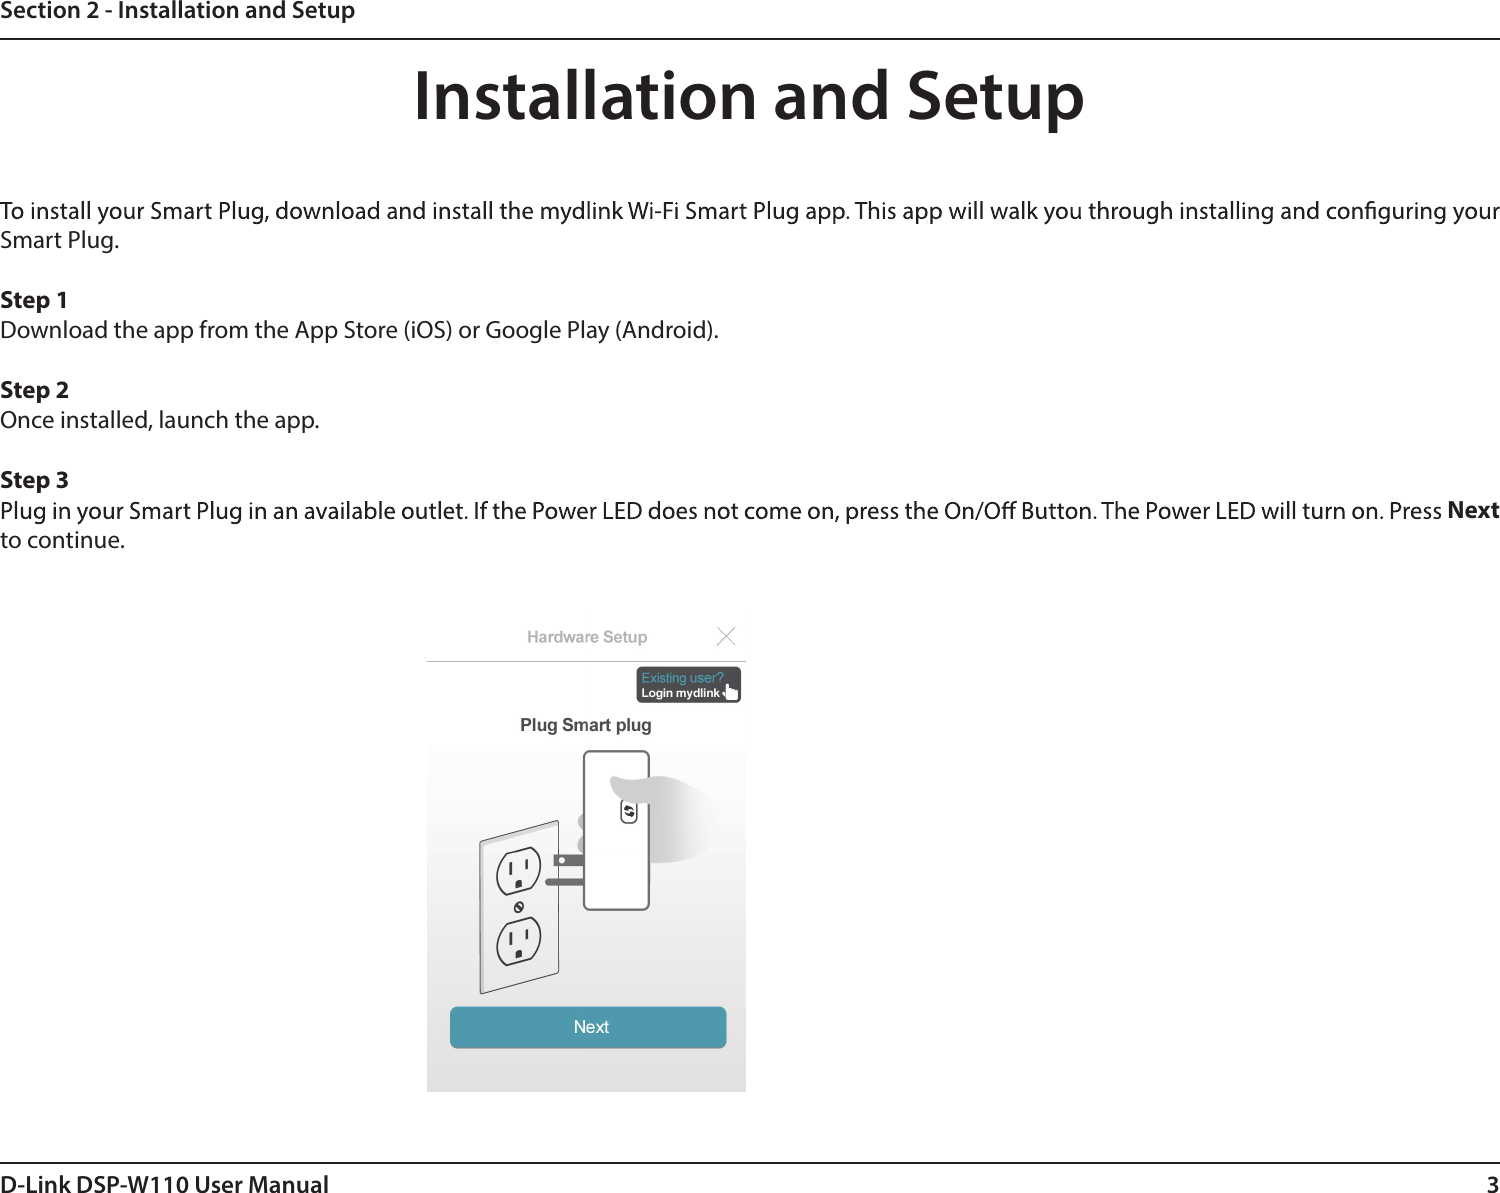 3D-Link DSP-W110 User ManualSection 2 - Installation and SetupInstallation and SetupSmart Plug.Step 1Download the app from the App Store (iOS) or Google Play (Android). Step 2Once installed, launch the app.Step 3Next to continue.